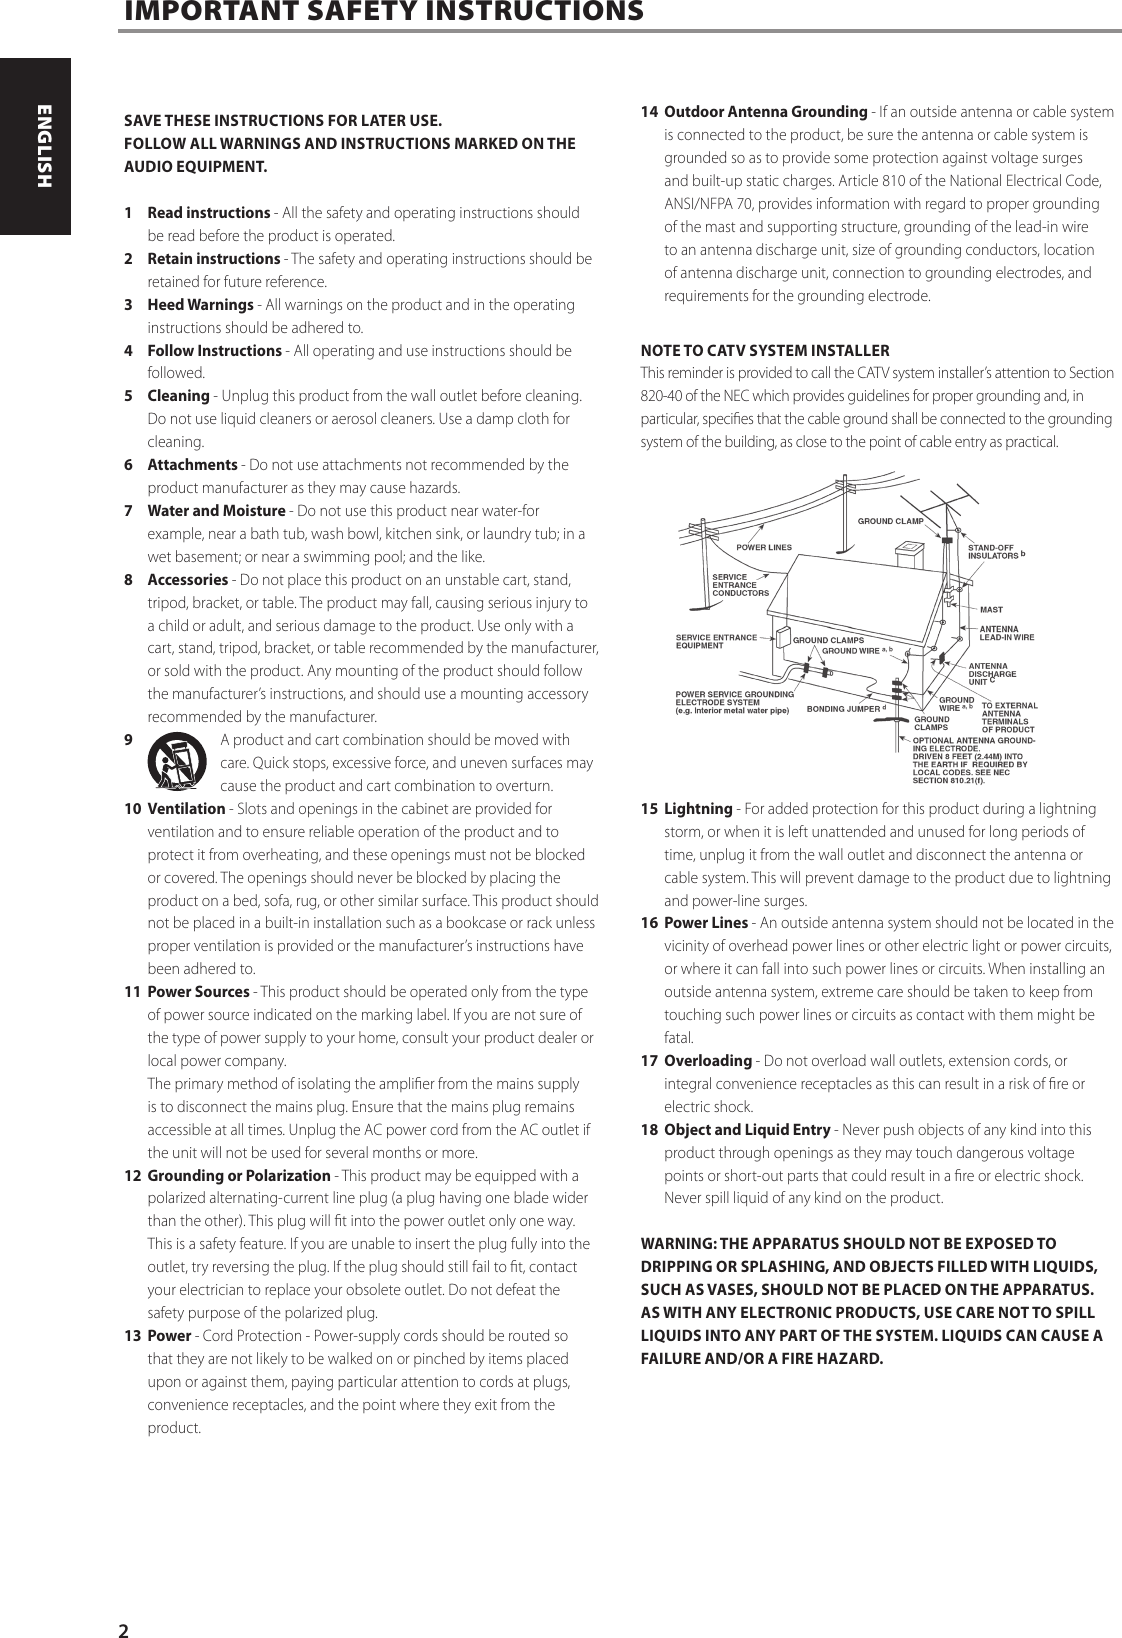 Page 2 of 12 - Nad-Electronics Nad-Electronics-C-275Bee-Stereo-Power-Amplifier-Owner-S-Manual